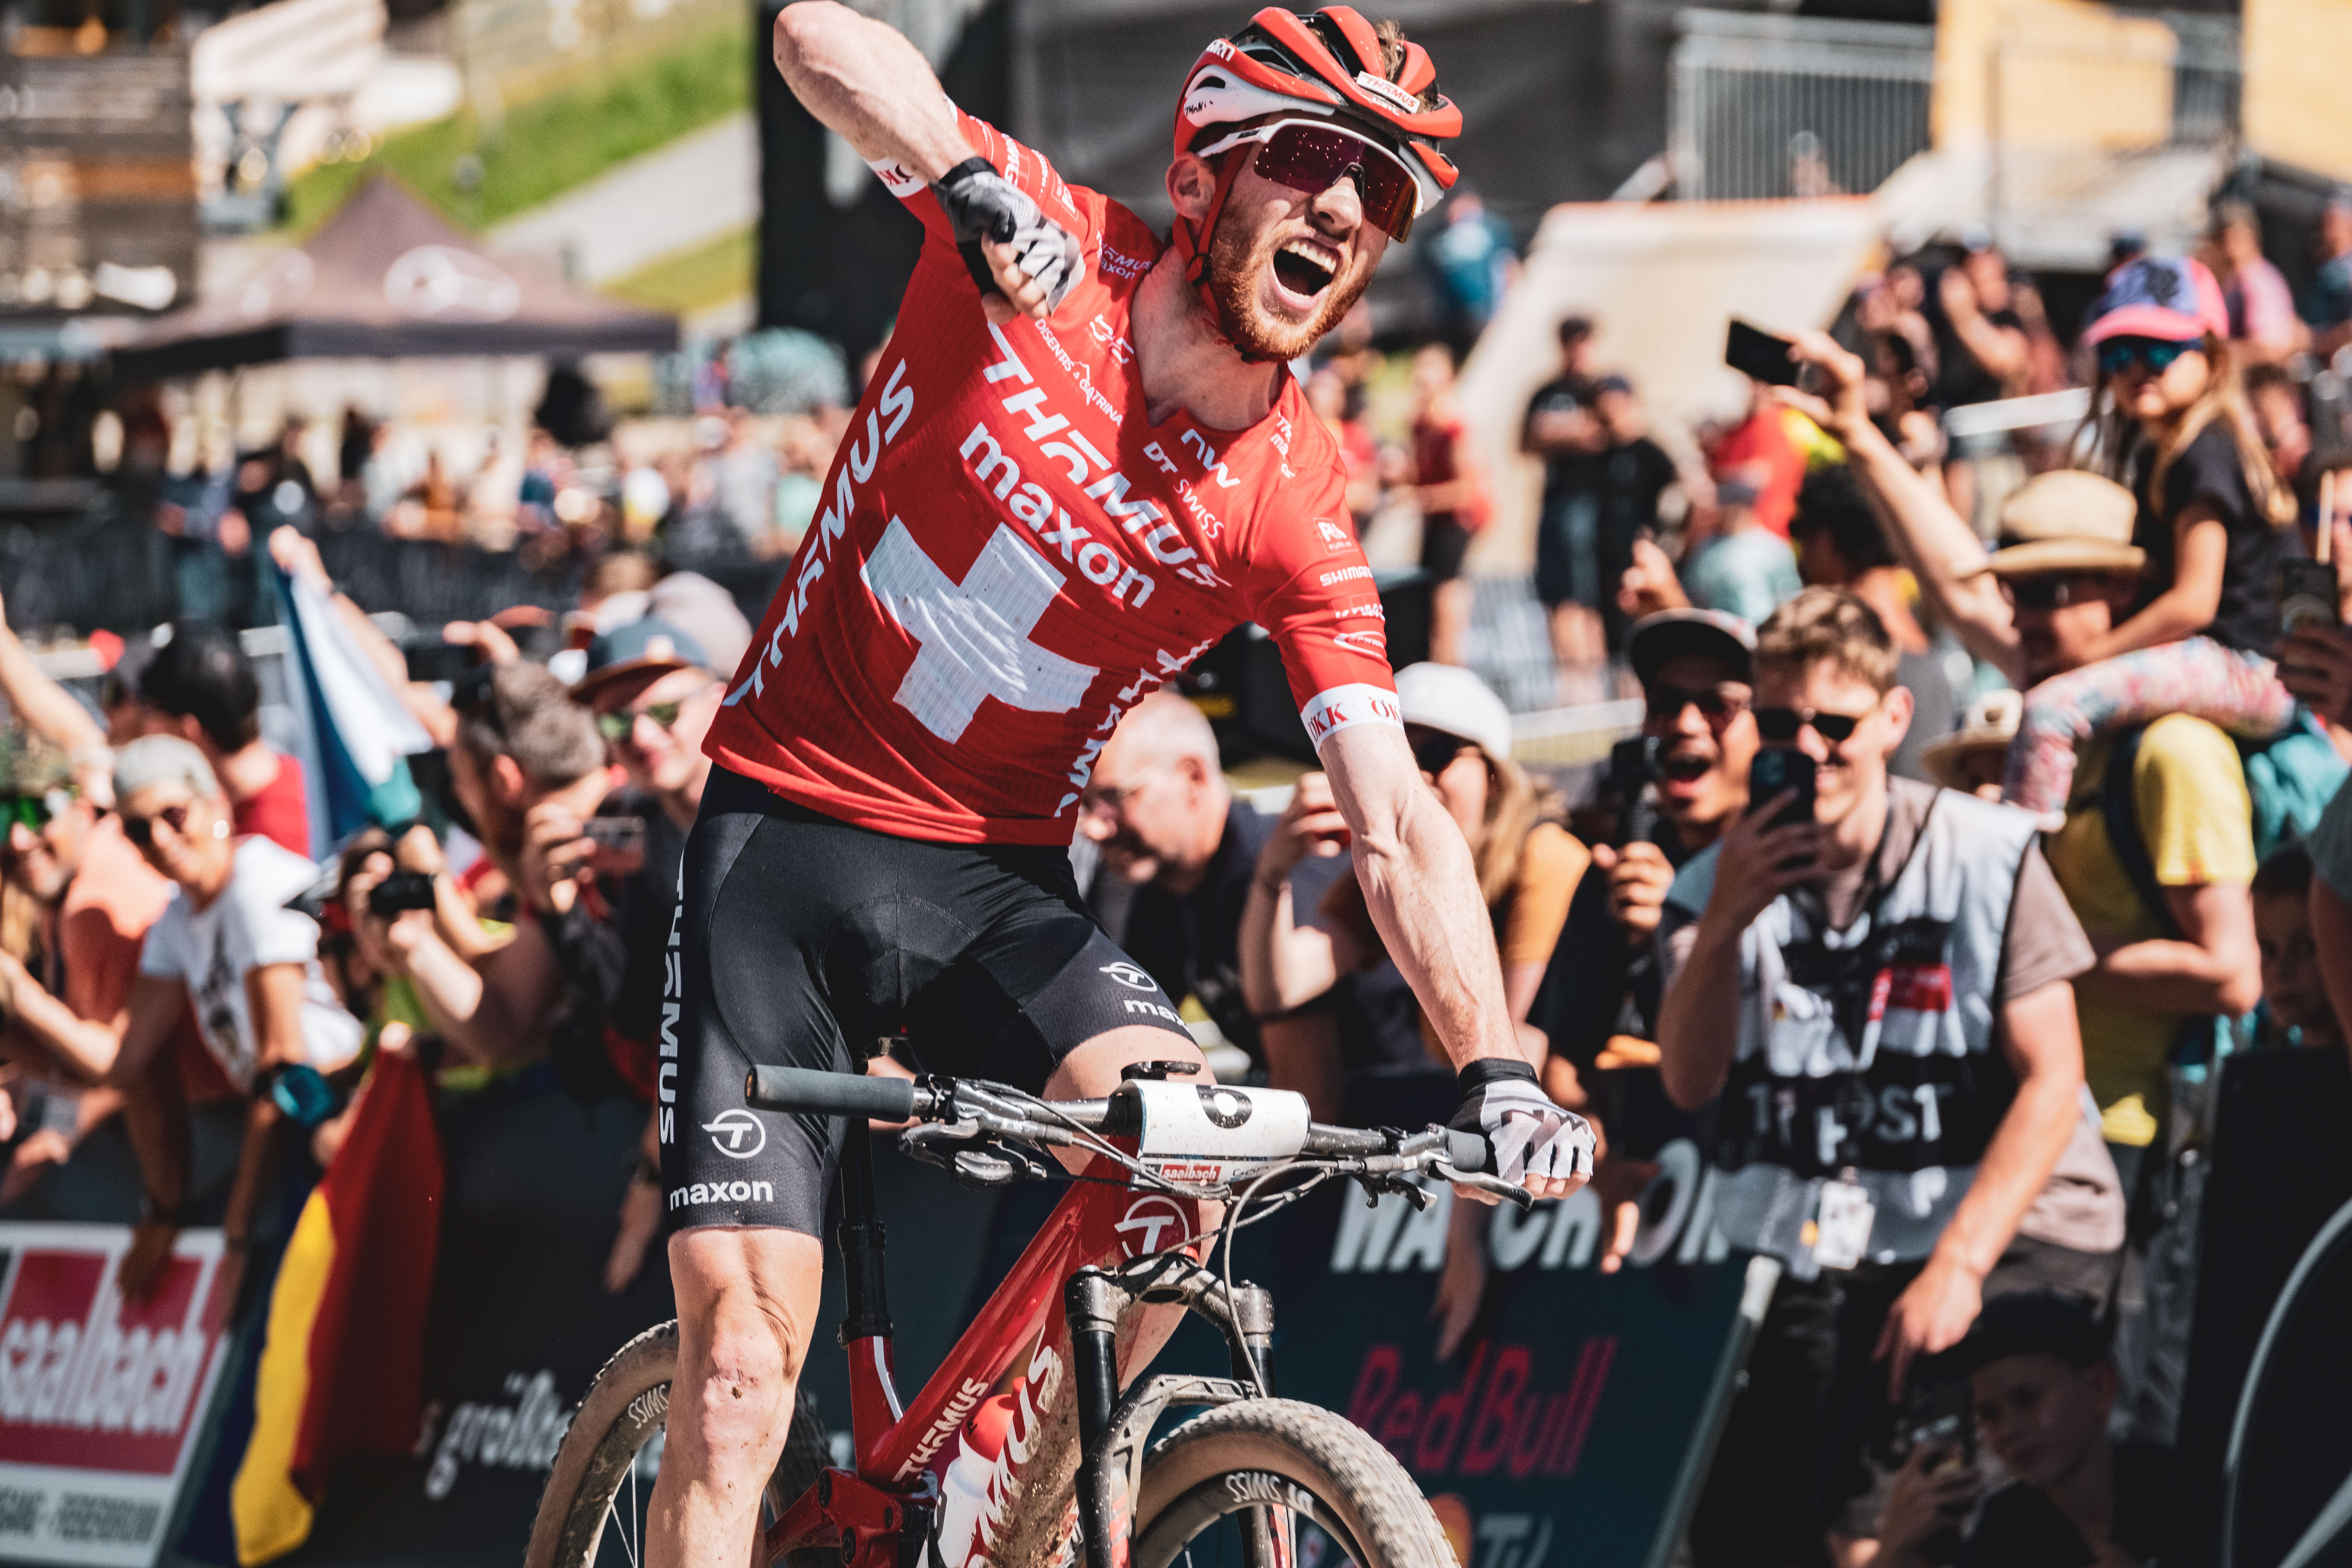 Epic Victory For Flückiger At The World Cup In Leogang